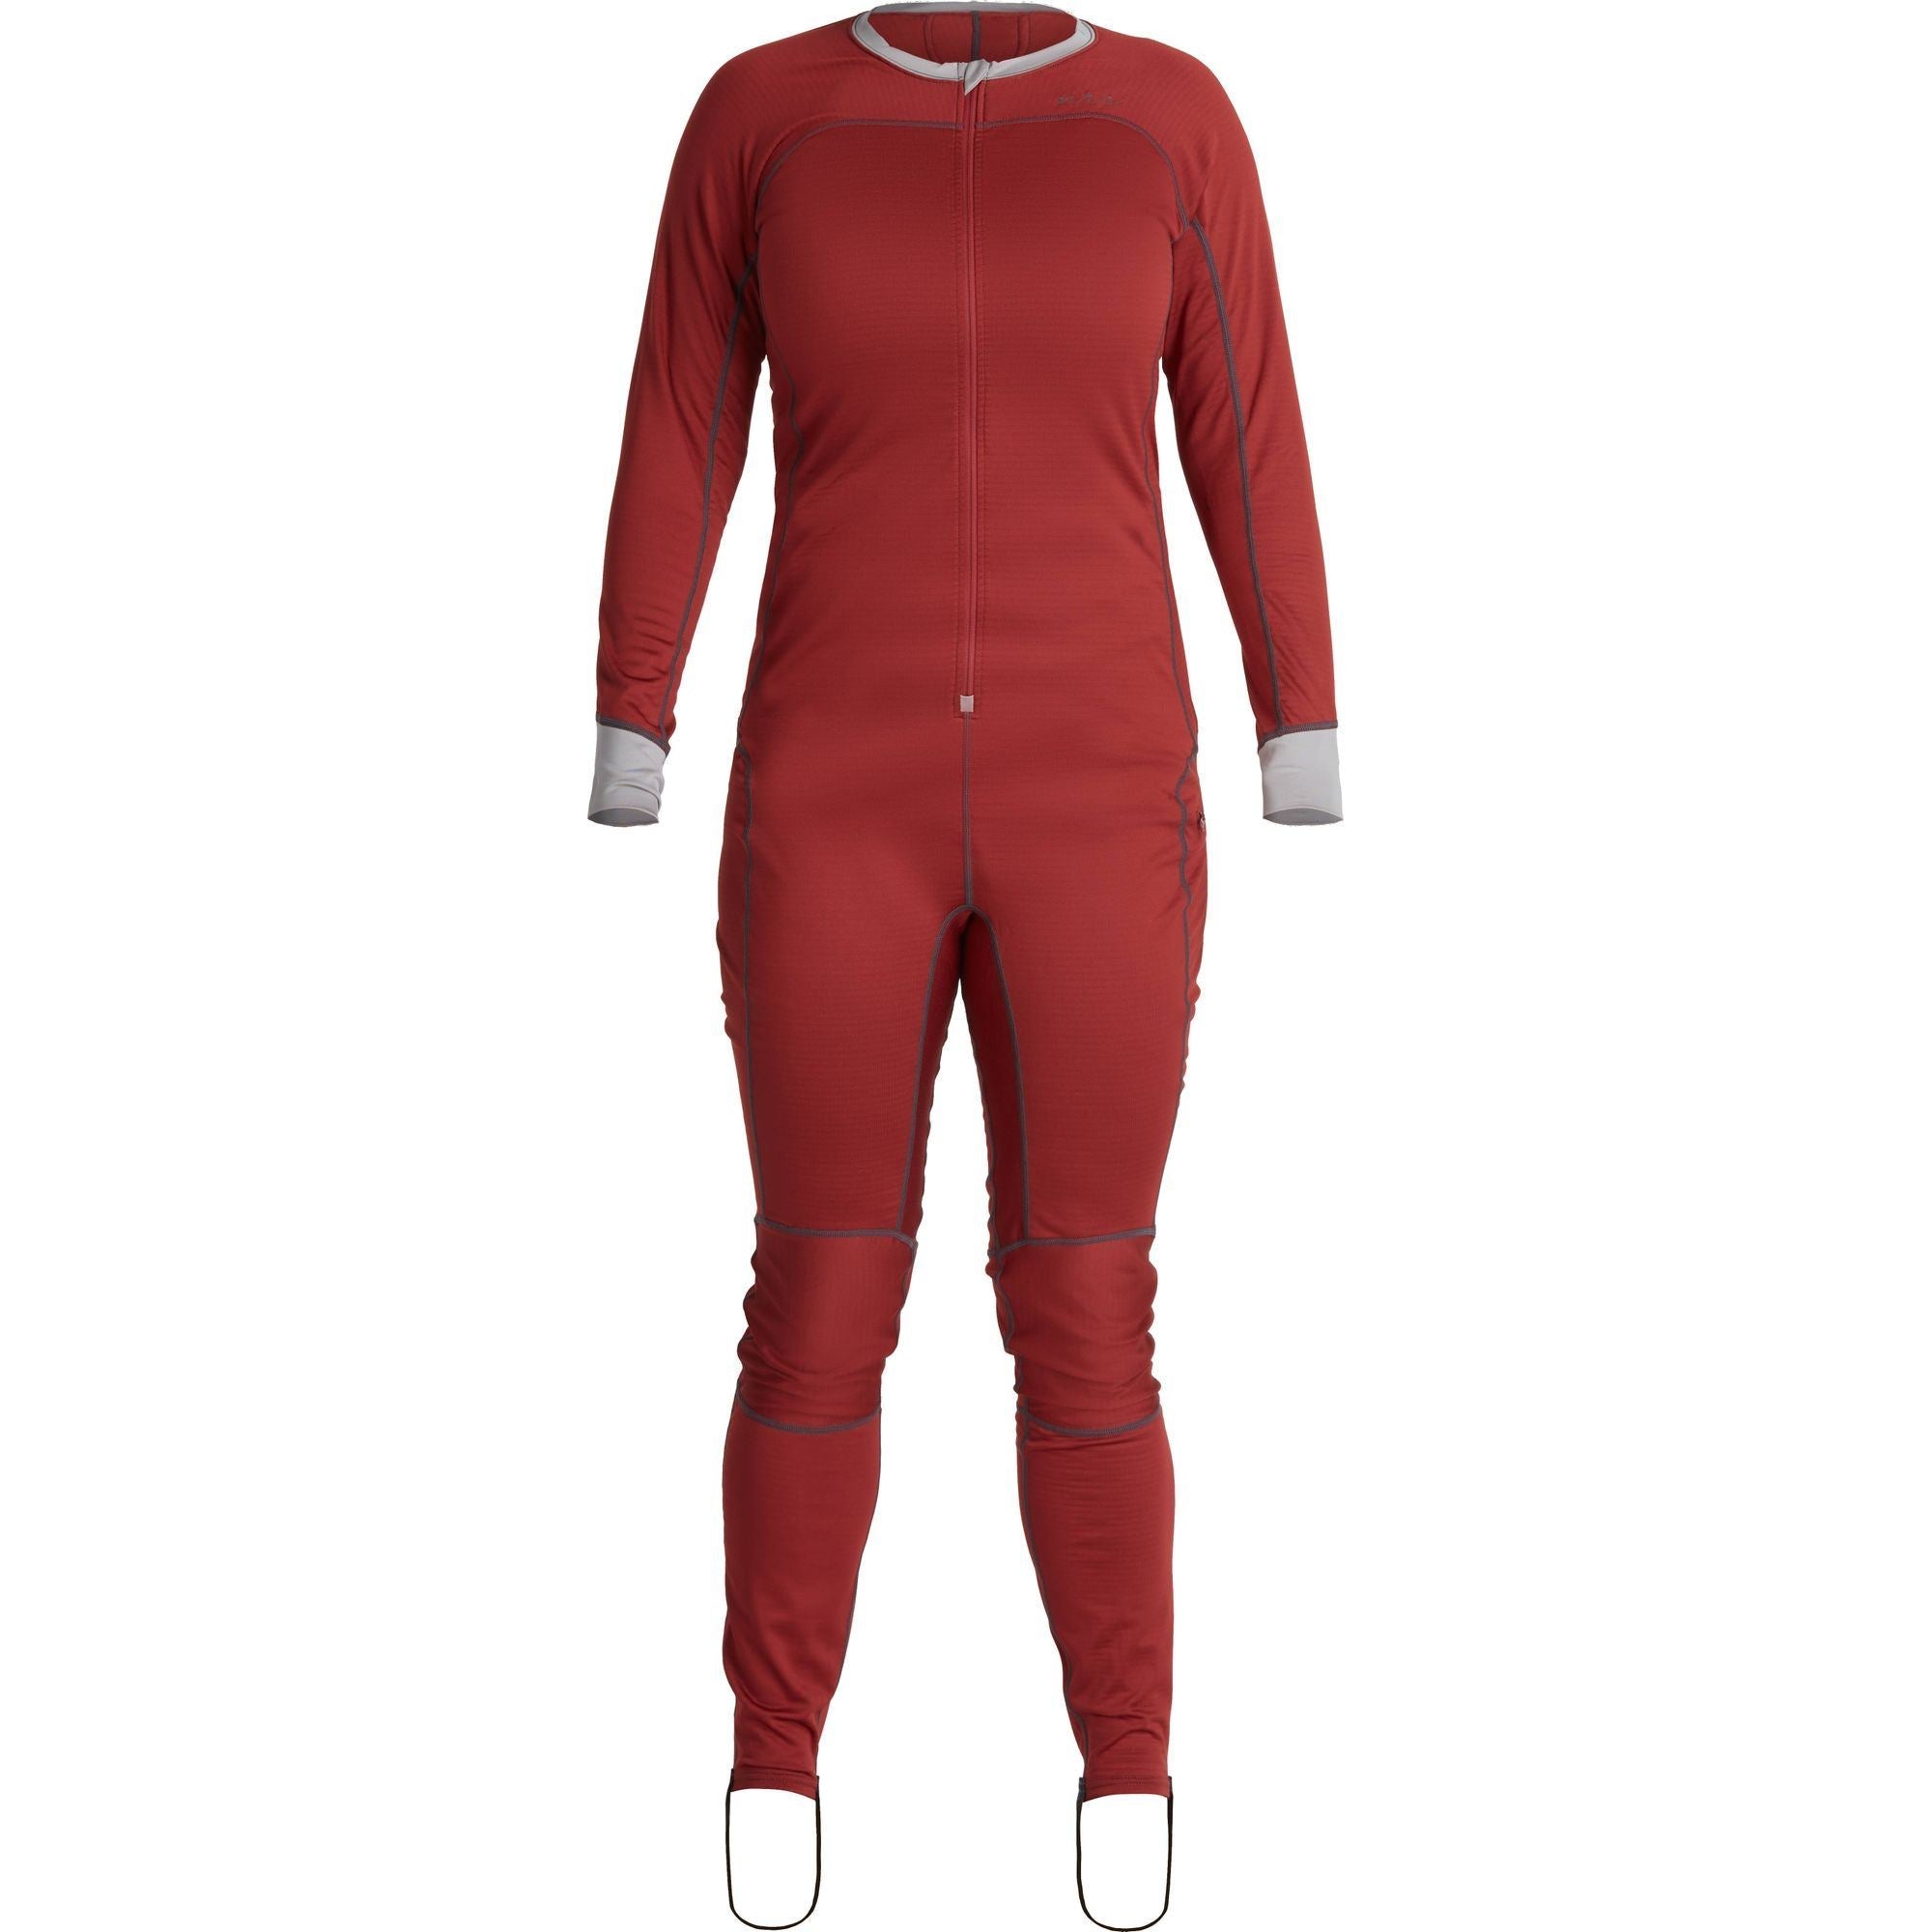 NRS Lightweight Union Suit, Dame